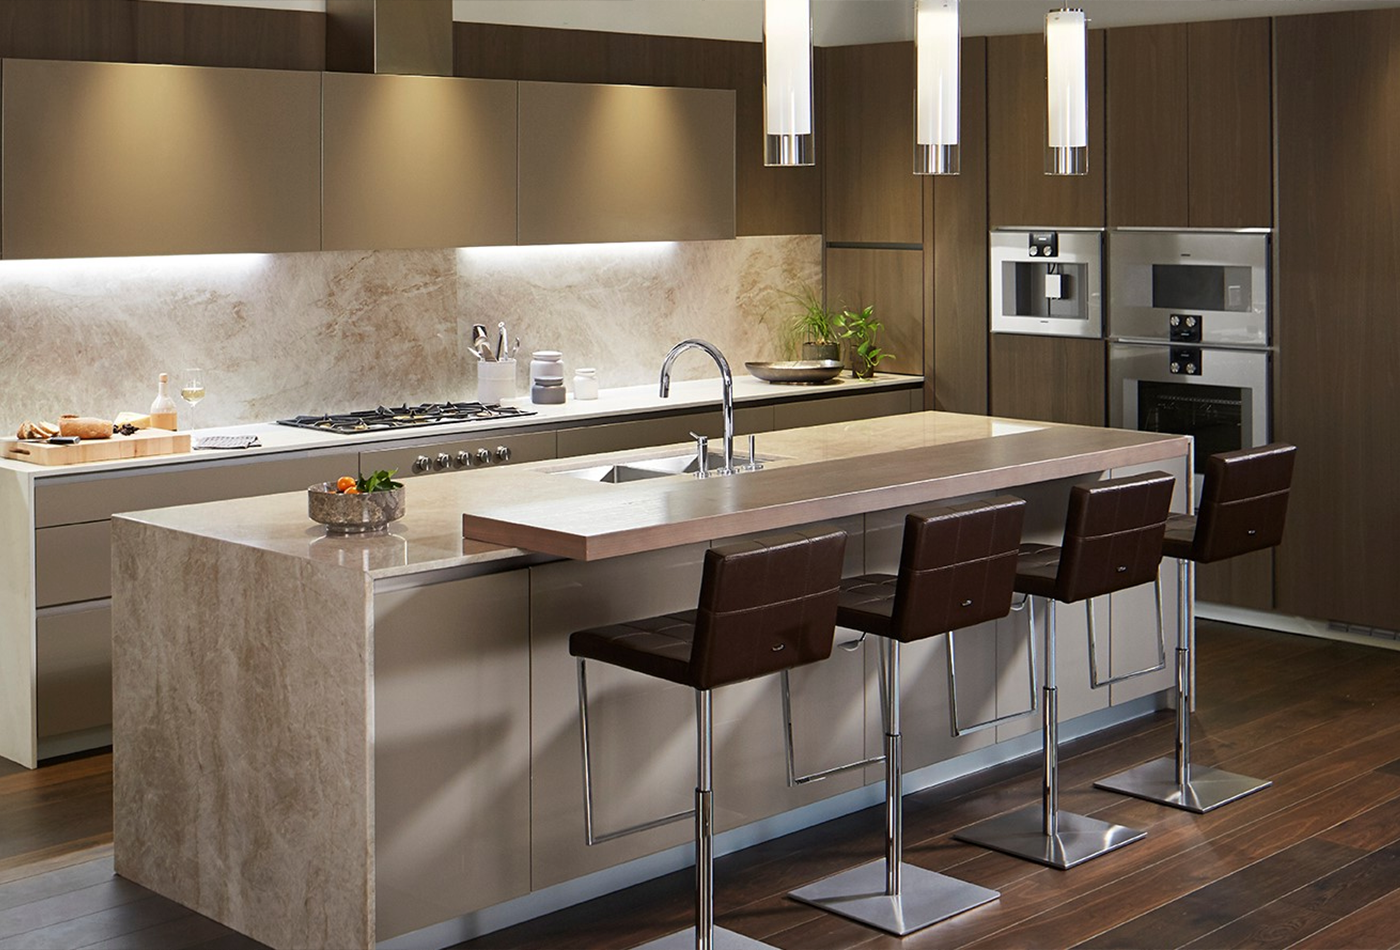 Exclusive Kitchen Surfaces At Budget - Friendly Prices!!